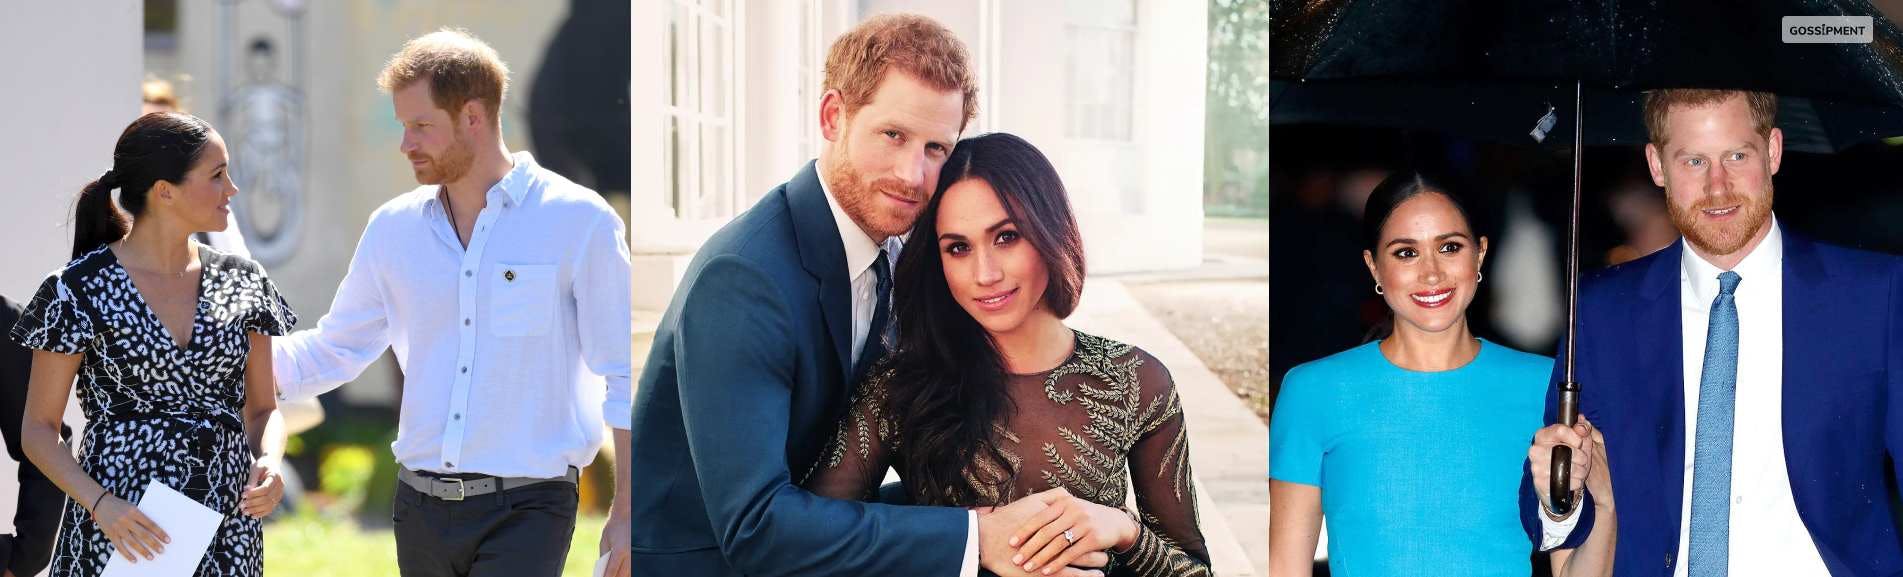 Cover Image for It Seems Rocky Ahead For Prince Harry And Meghan Markle: Report